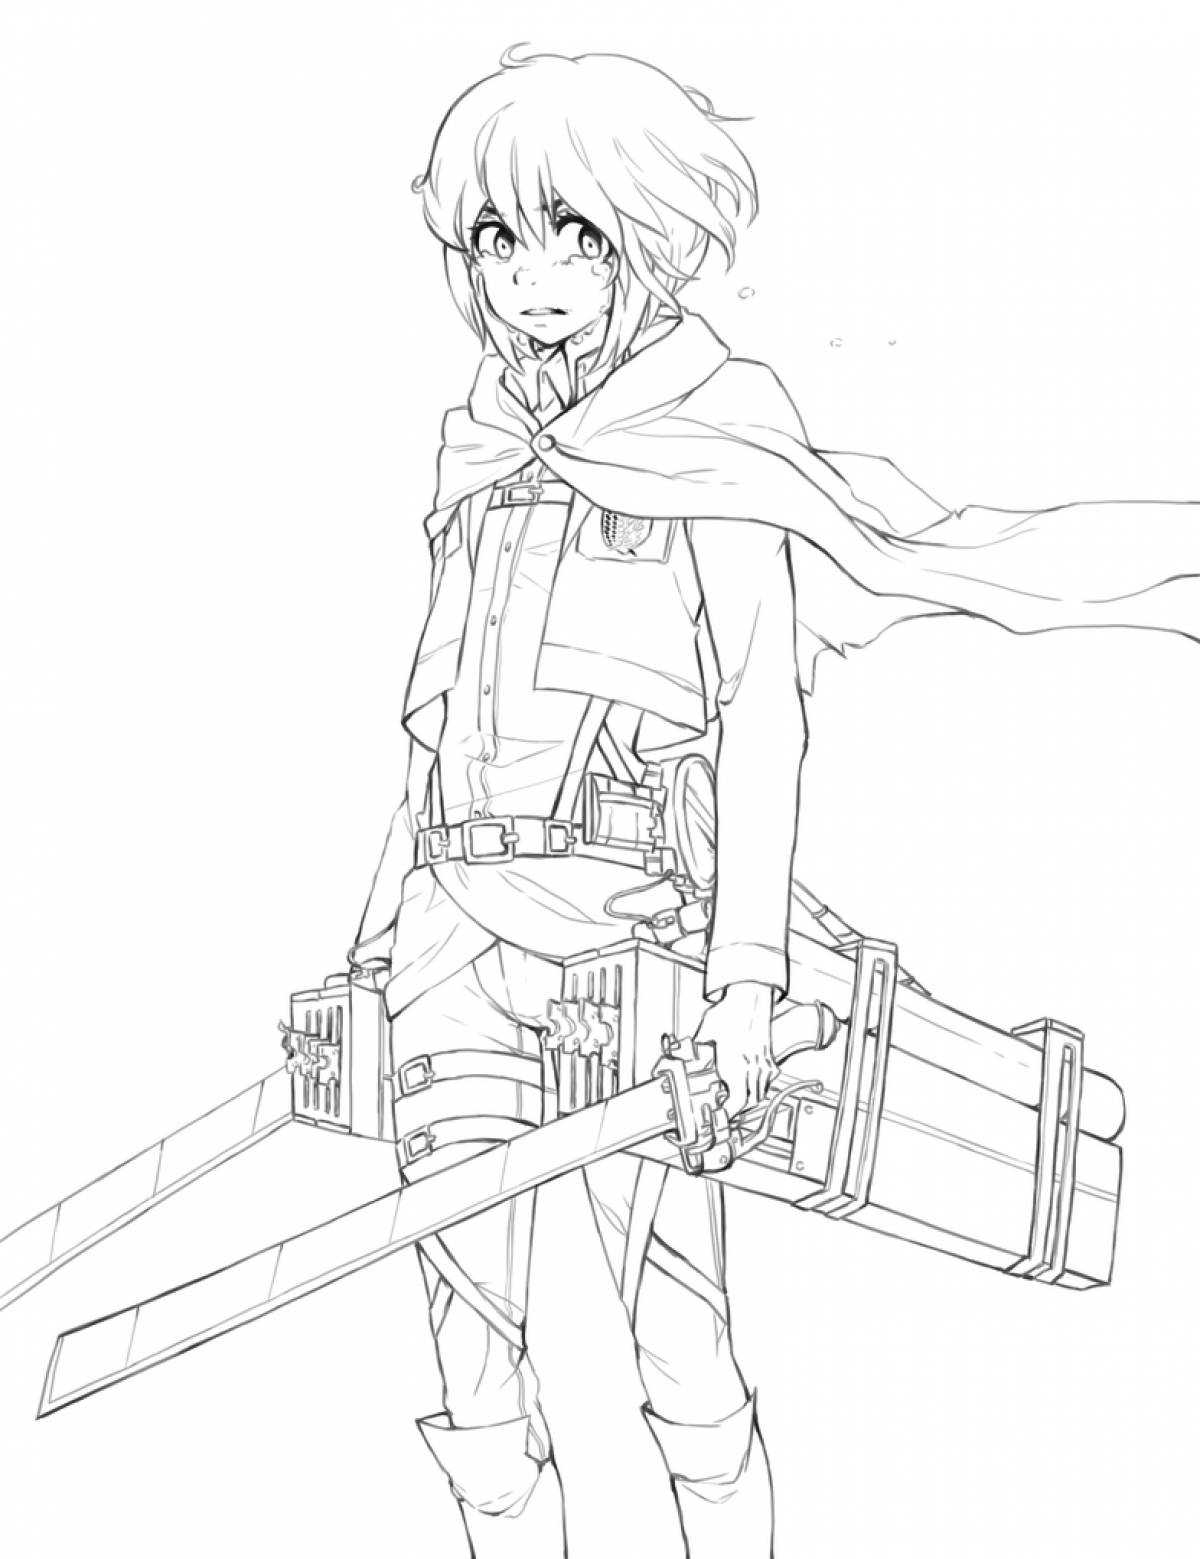 Mikasa with a sword